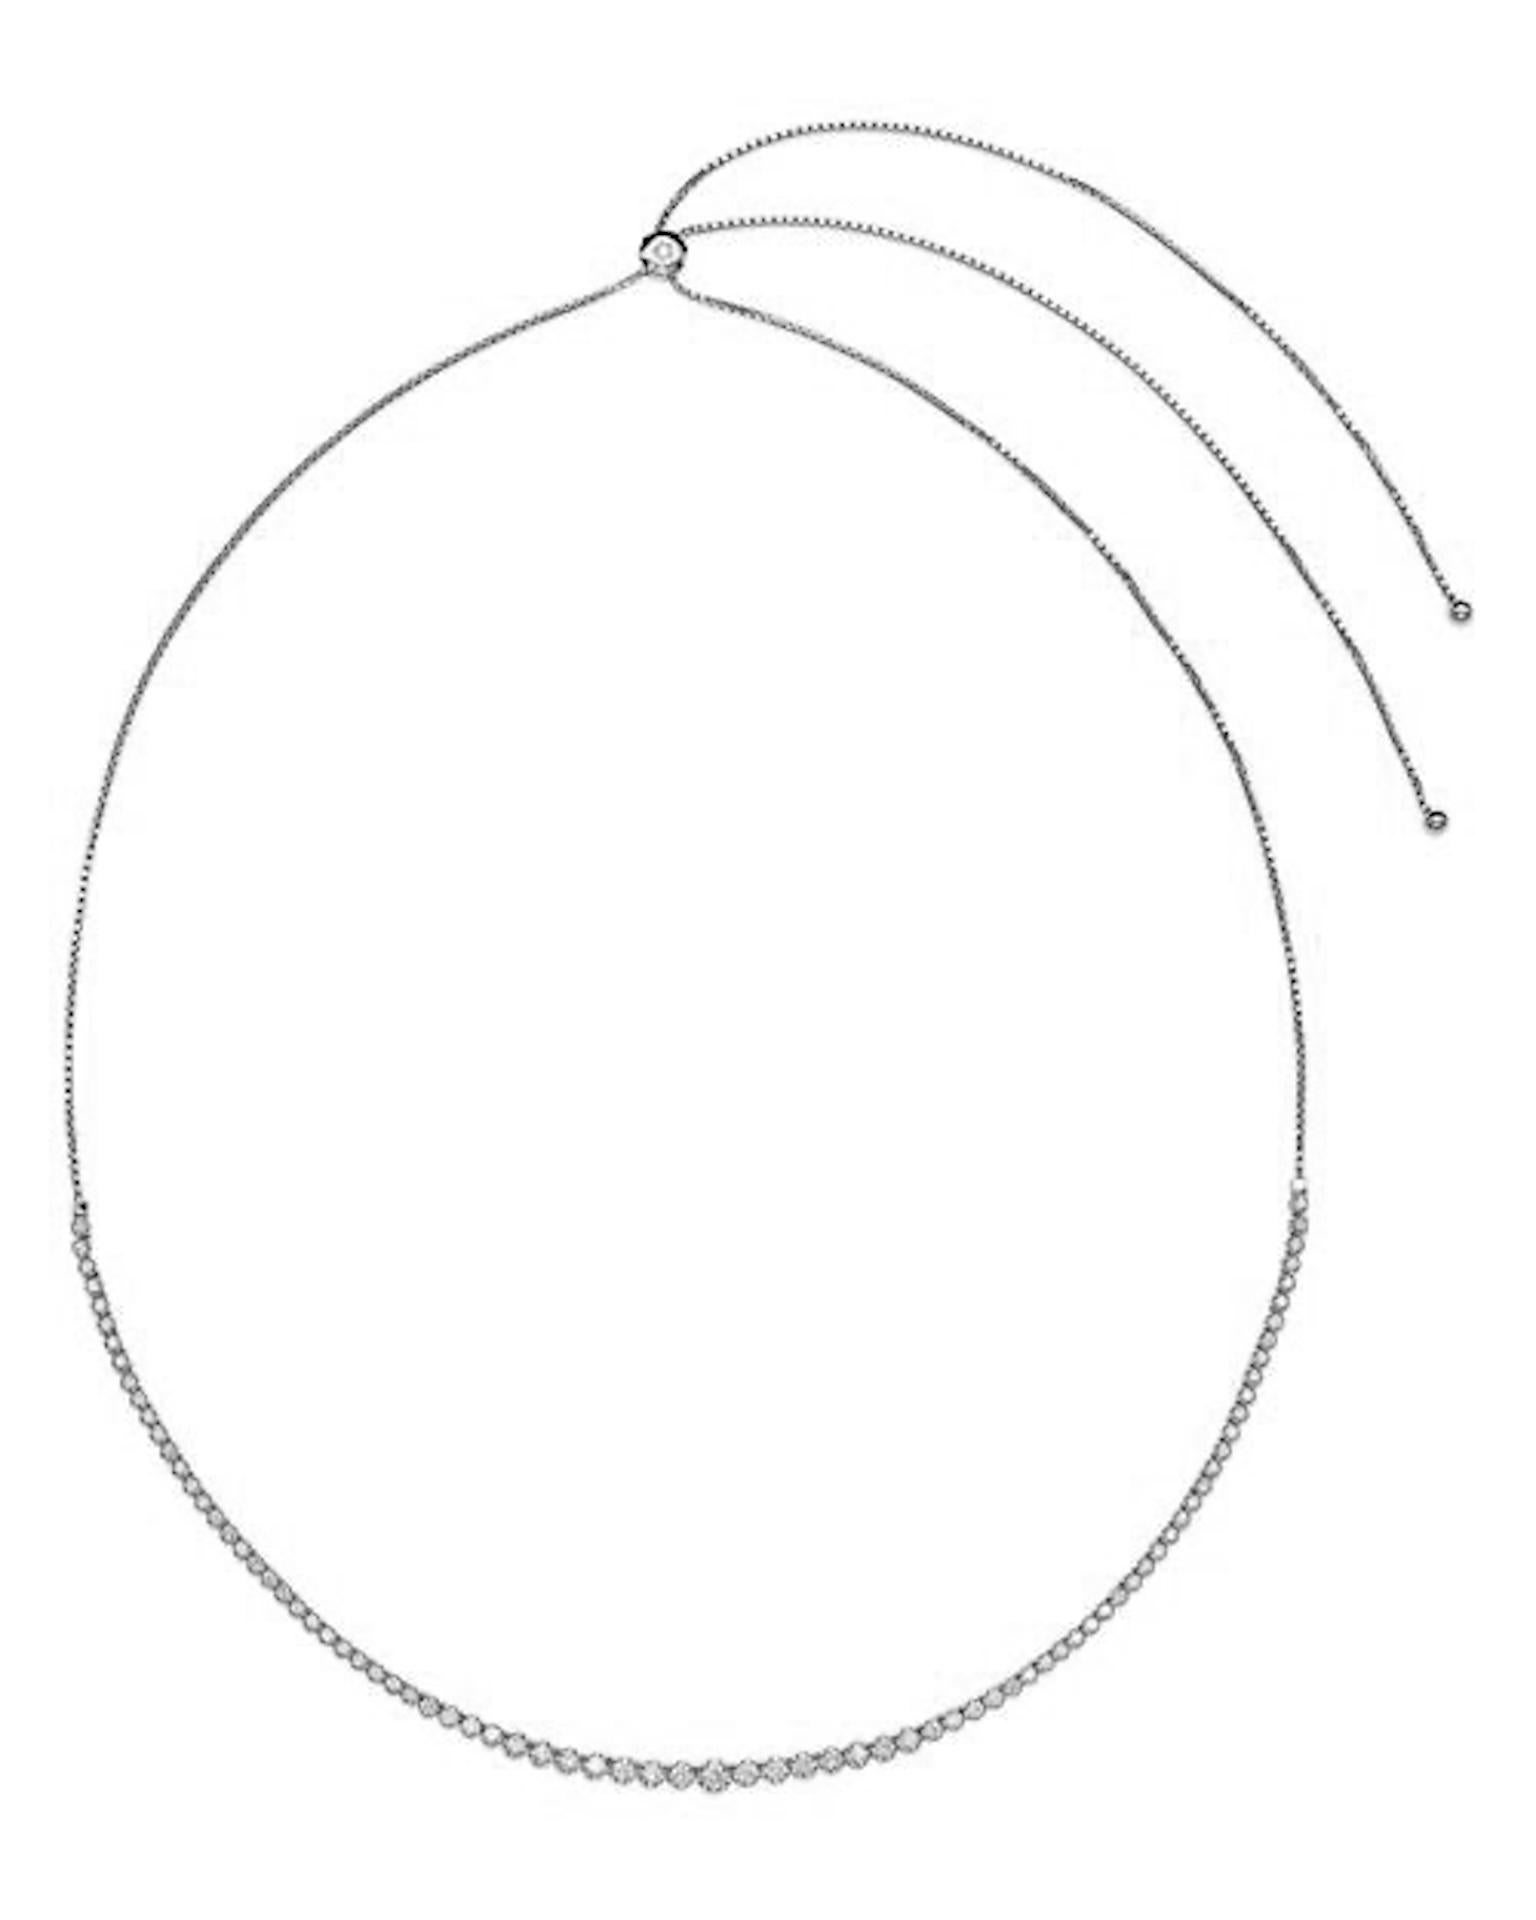 Custom 14k white gold graduated half way bolo tennis necklace featuring 3.50 cts round diamonds 3 prong setting 14-32